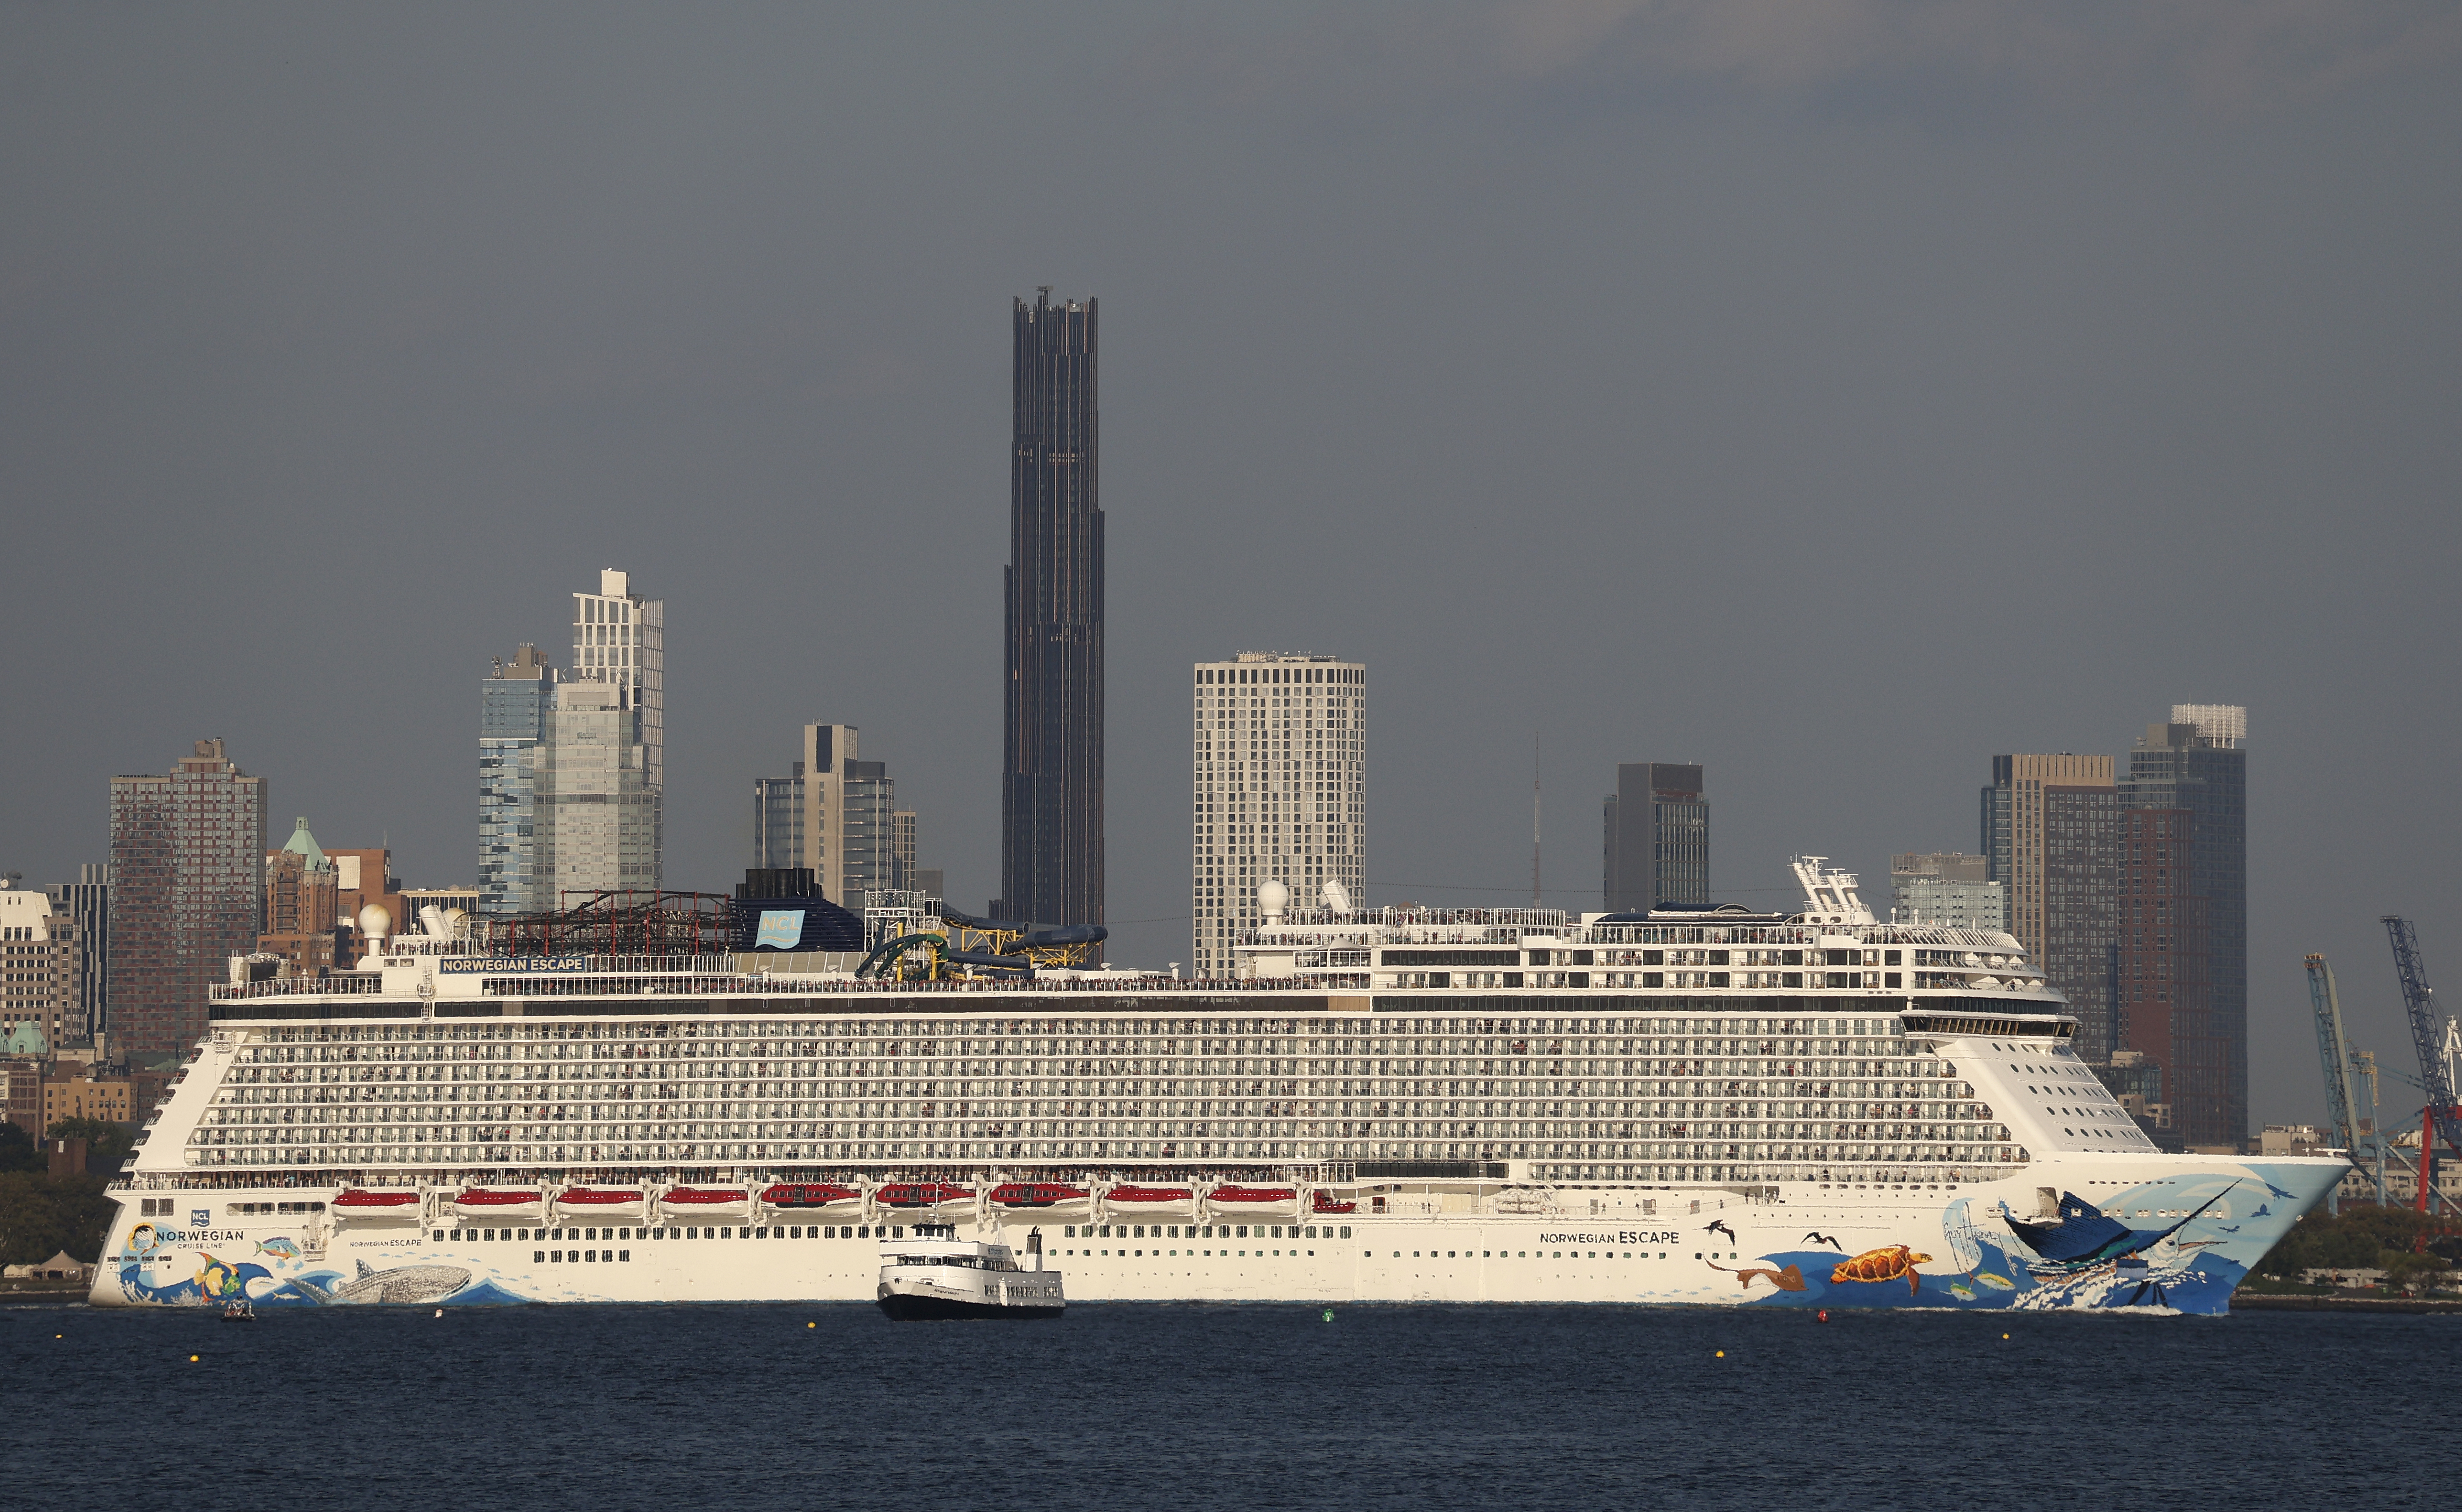 The Norwegian Escape cruise ship sails in front of the skyline of Brooklyn and the Brooklyn Tower in New York City.